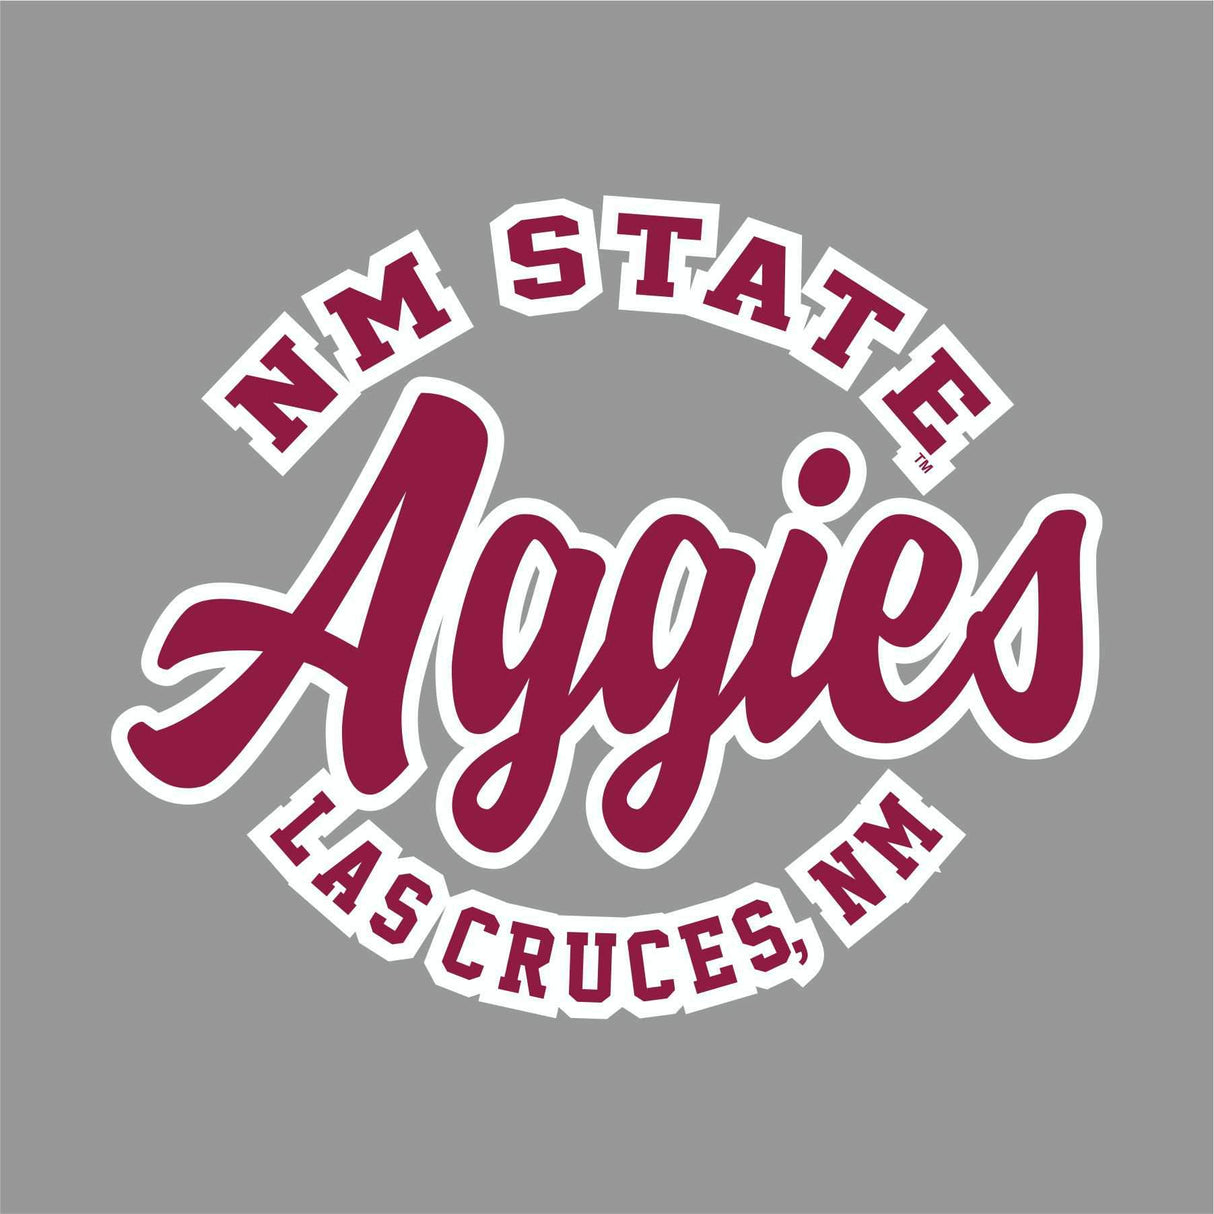 Aggies Las Cruces Decal